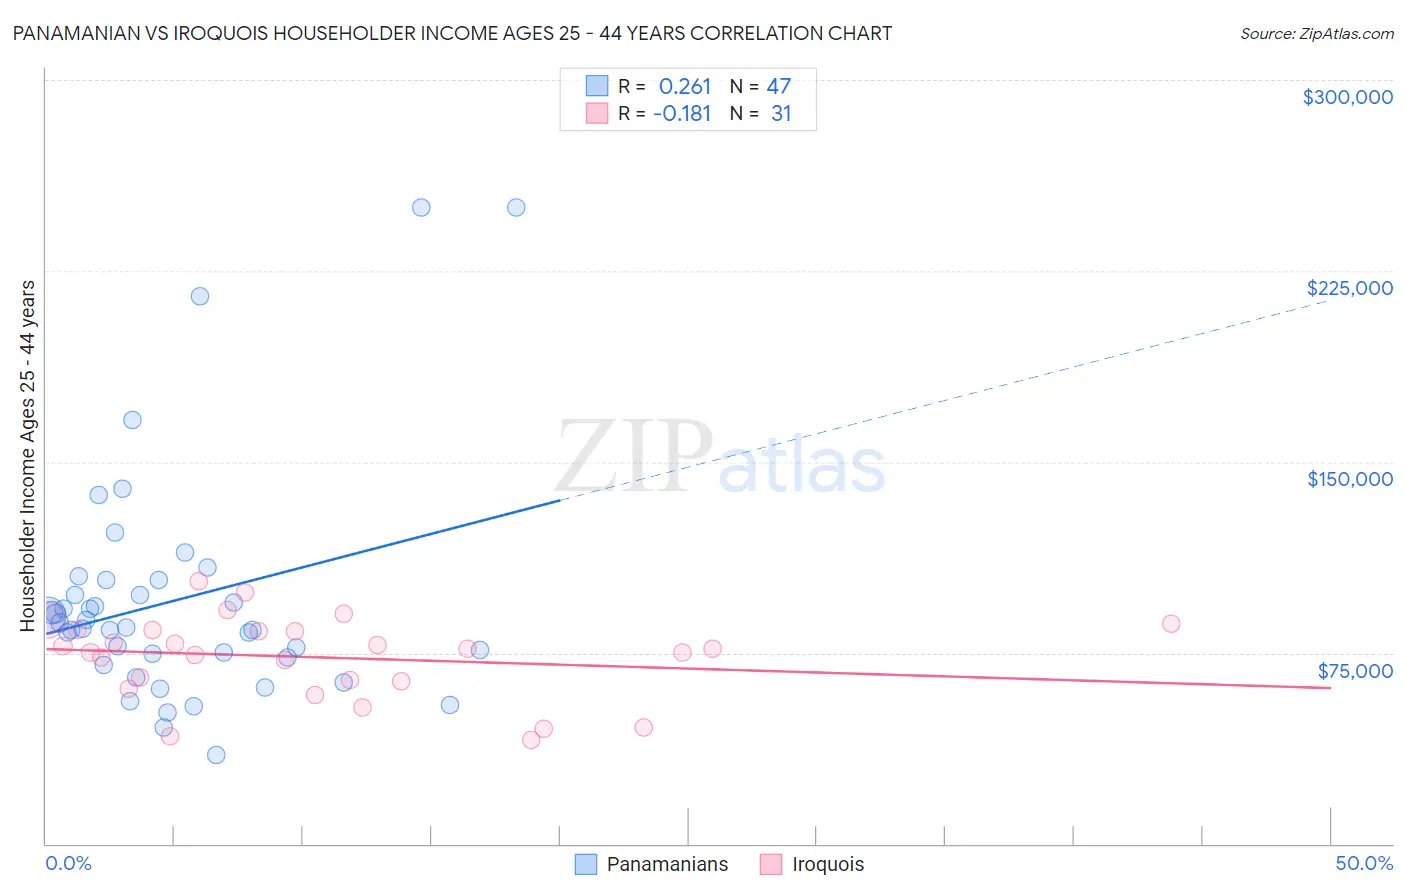 Panamanian vs Iroquois Householder Income Ages 25 - 44 years